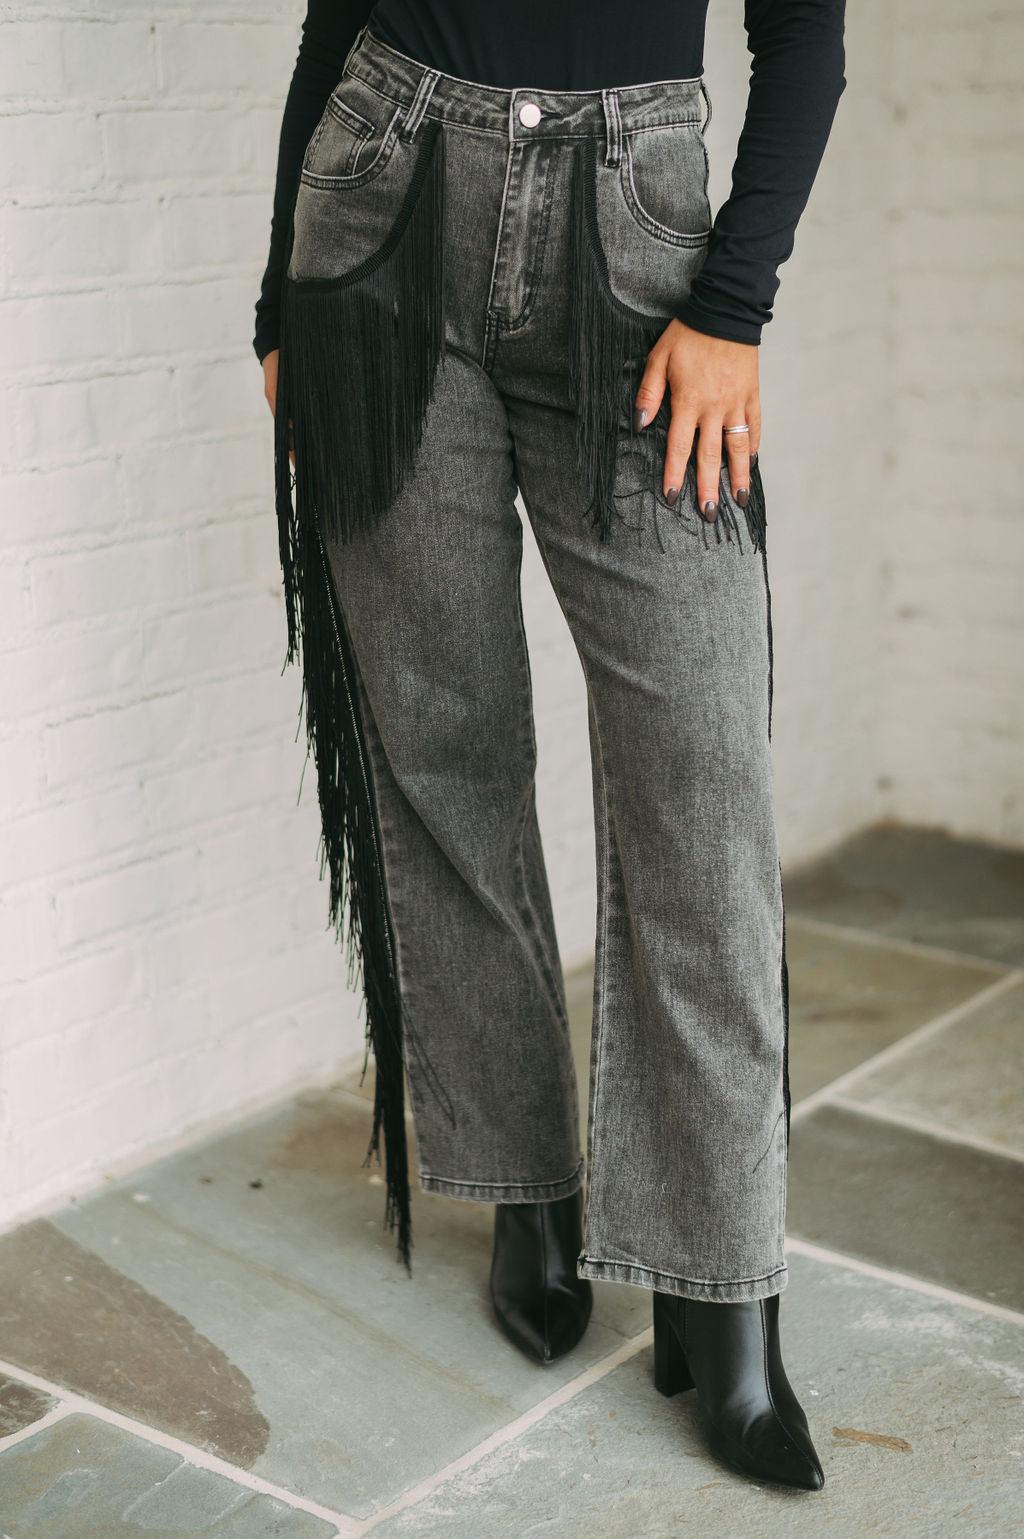 Tassel Accented Jeans